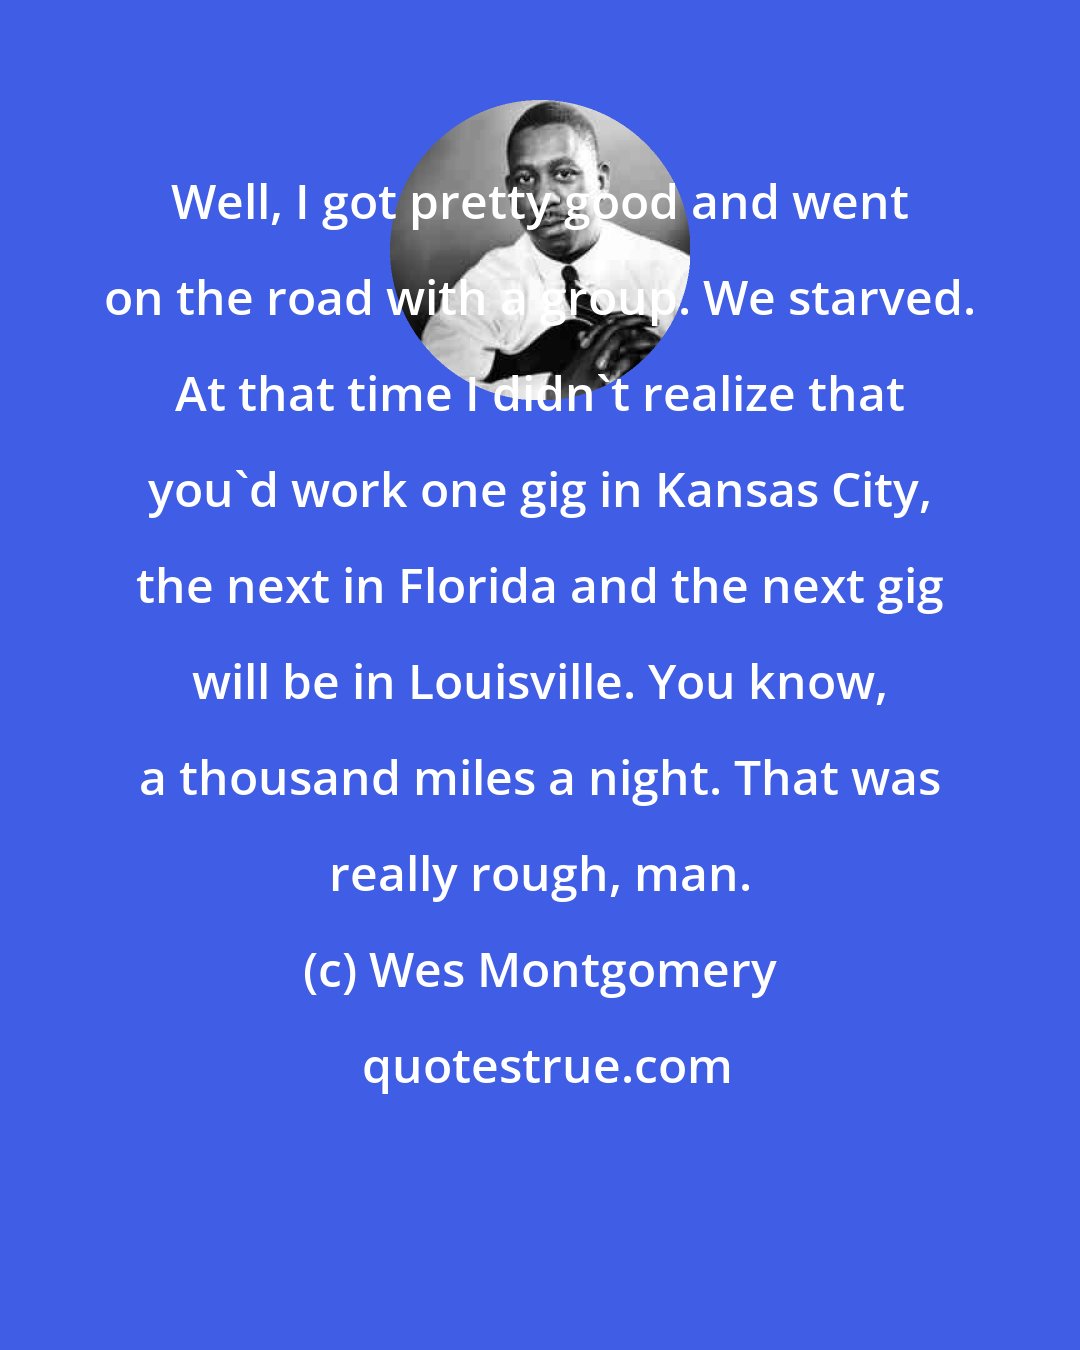 Wes Montgomery: Well, I got pretty good and went on the road with a group. We starved. At that time I didn't realize that you'd work one gig in Kansas City, the next in Florida and the next gig will be in Louisville. You know, a thousand miles a night. That was really rough, man.